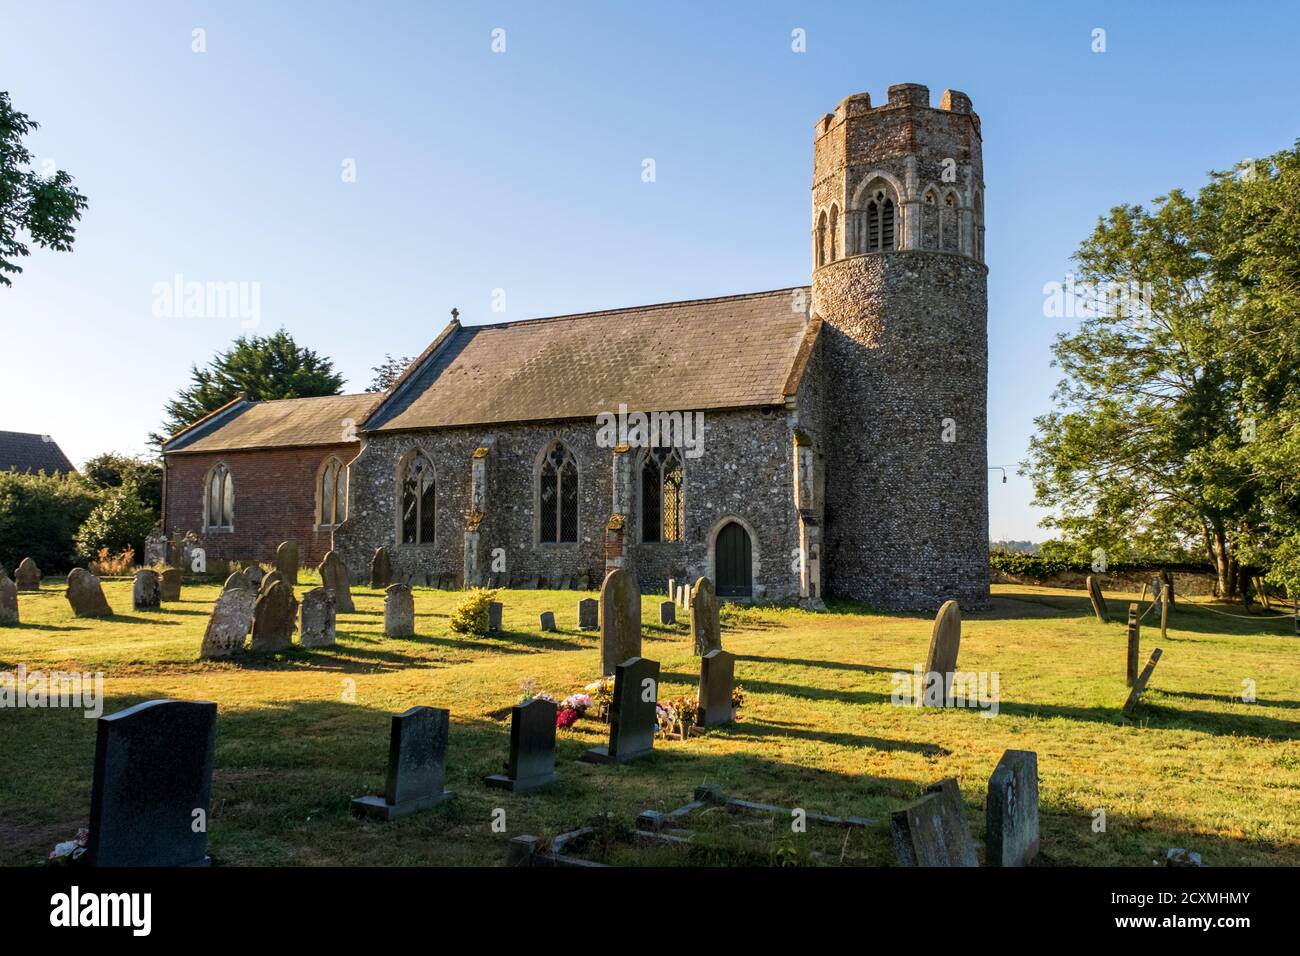 Saint Peter's Church at Repps with Bastwick in Repps, Norfolk, England Stock Photo